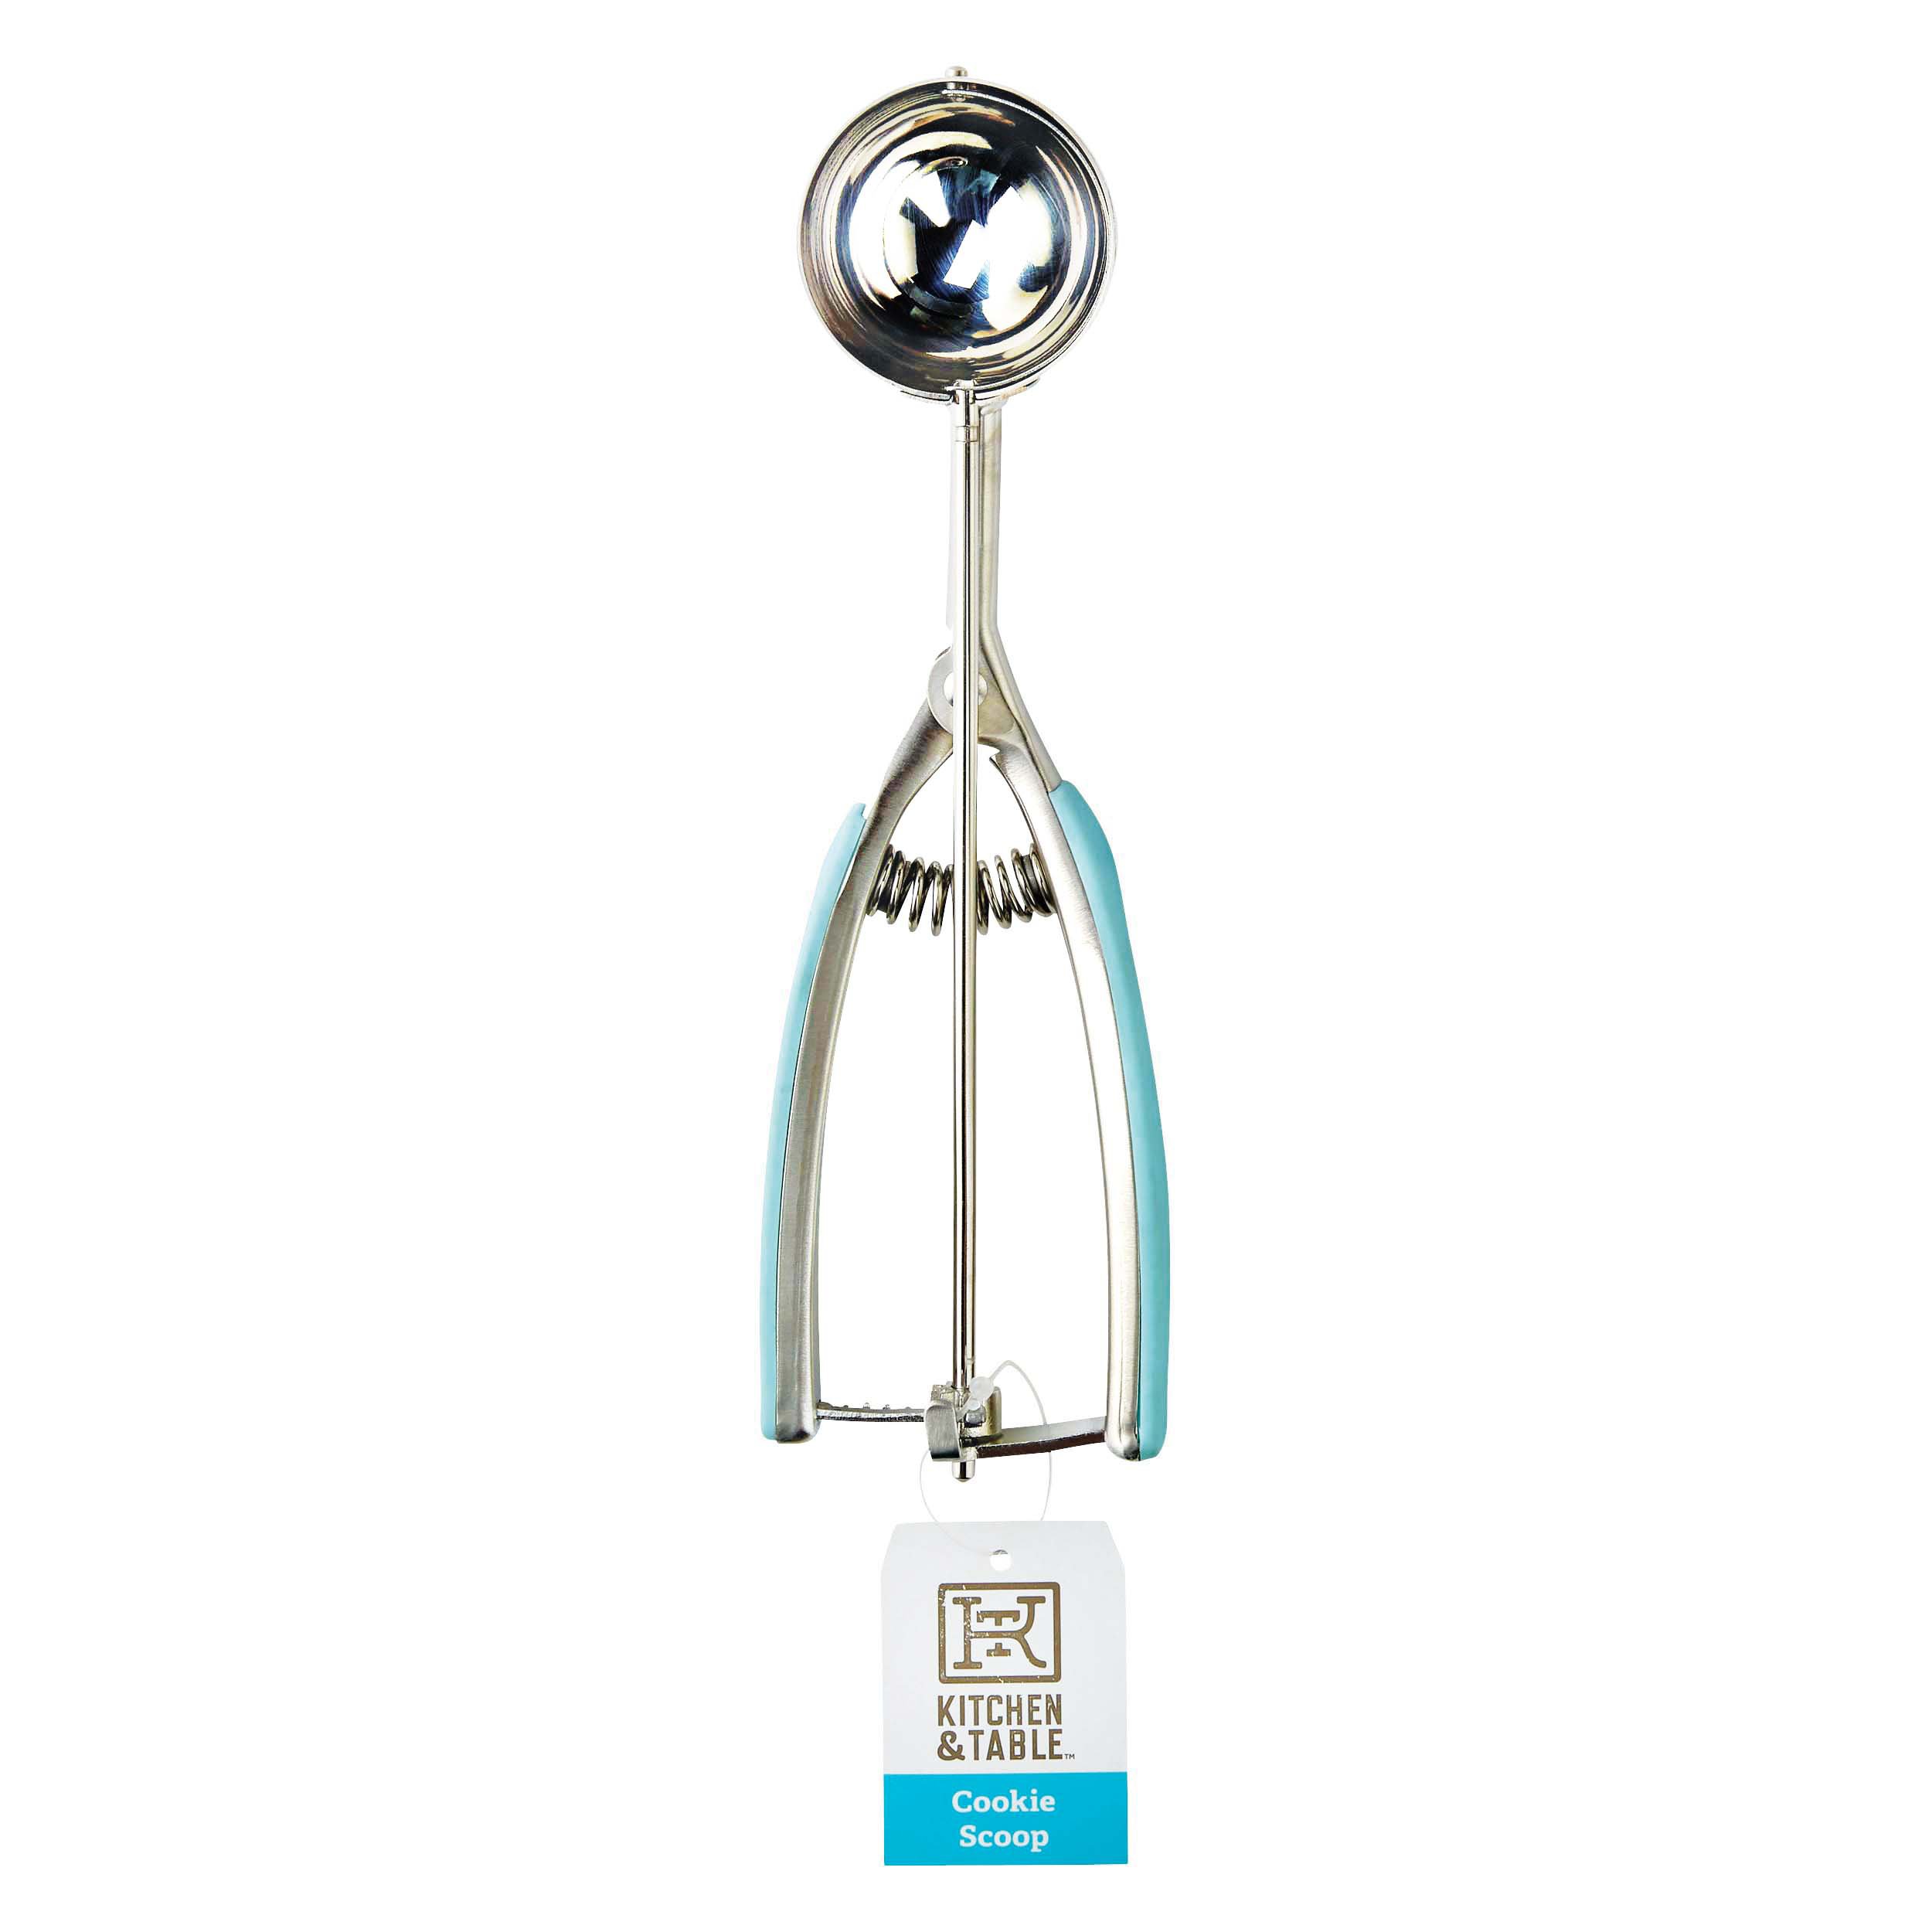 Kitchen & Table by H-E-B Stainless Steel Cookie Scoop - Shop Baking Tools at H-E-B